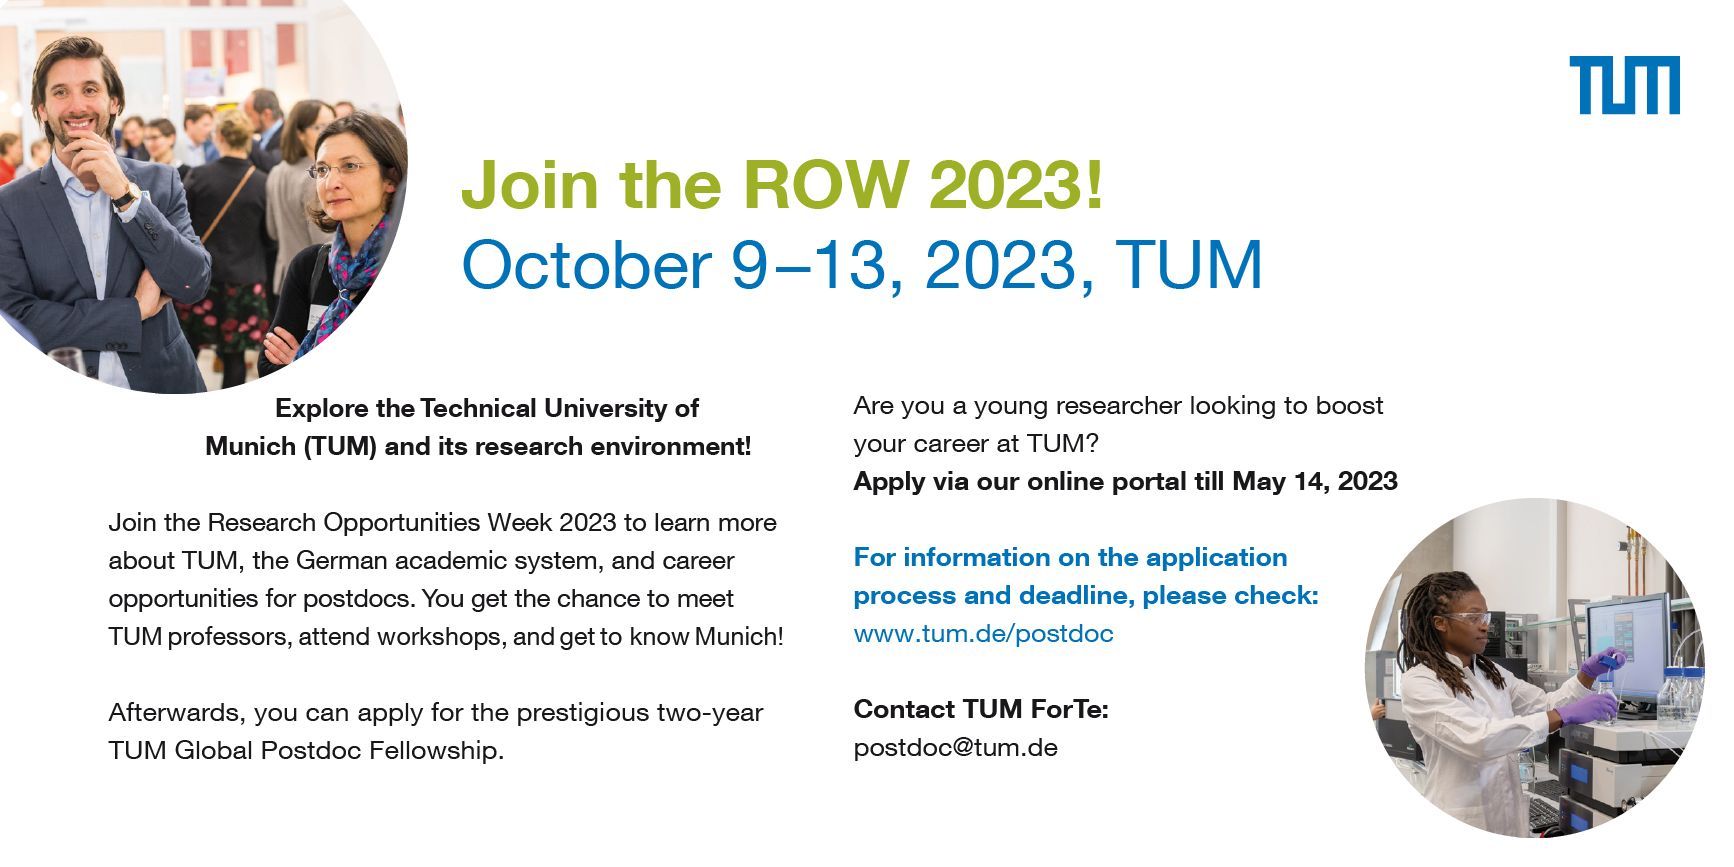 Join the ROW 2023! Oct. 9-13, 2023, TUM